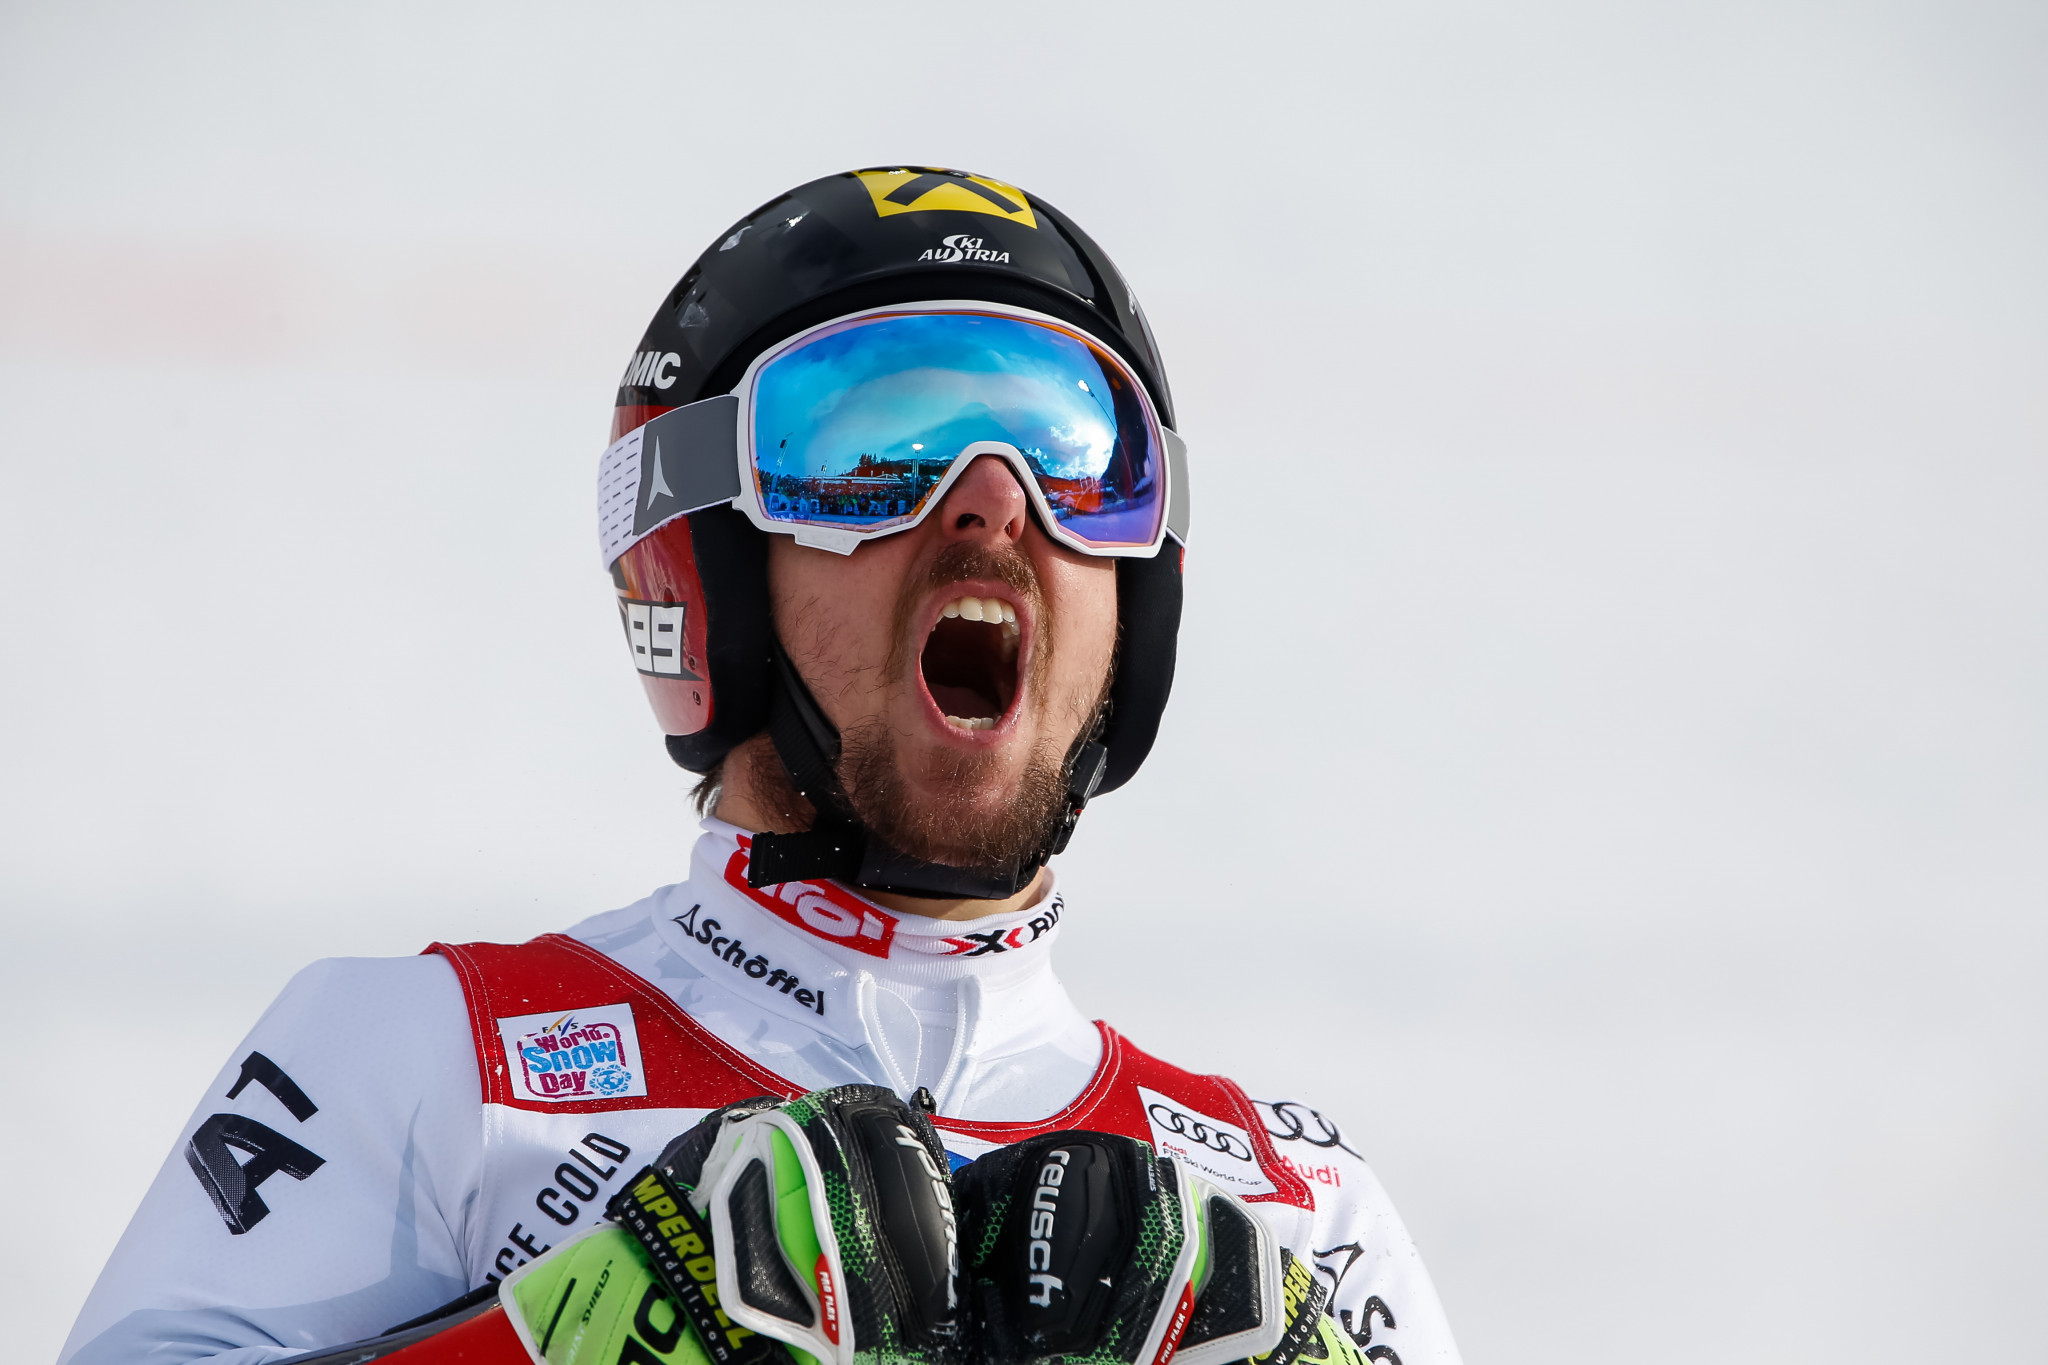 Austria's Marcel Hirscher dominated both runs to claim a record fifth-consecutive giant slalom win at the FIS Alpine Skiing World Cup event in Alta Badia in Italy ©Getty Images